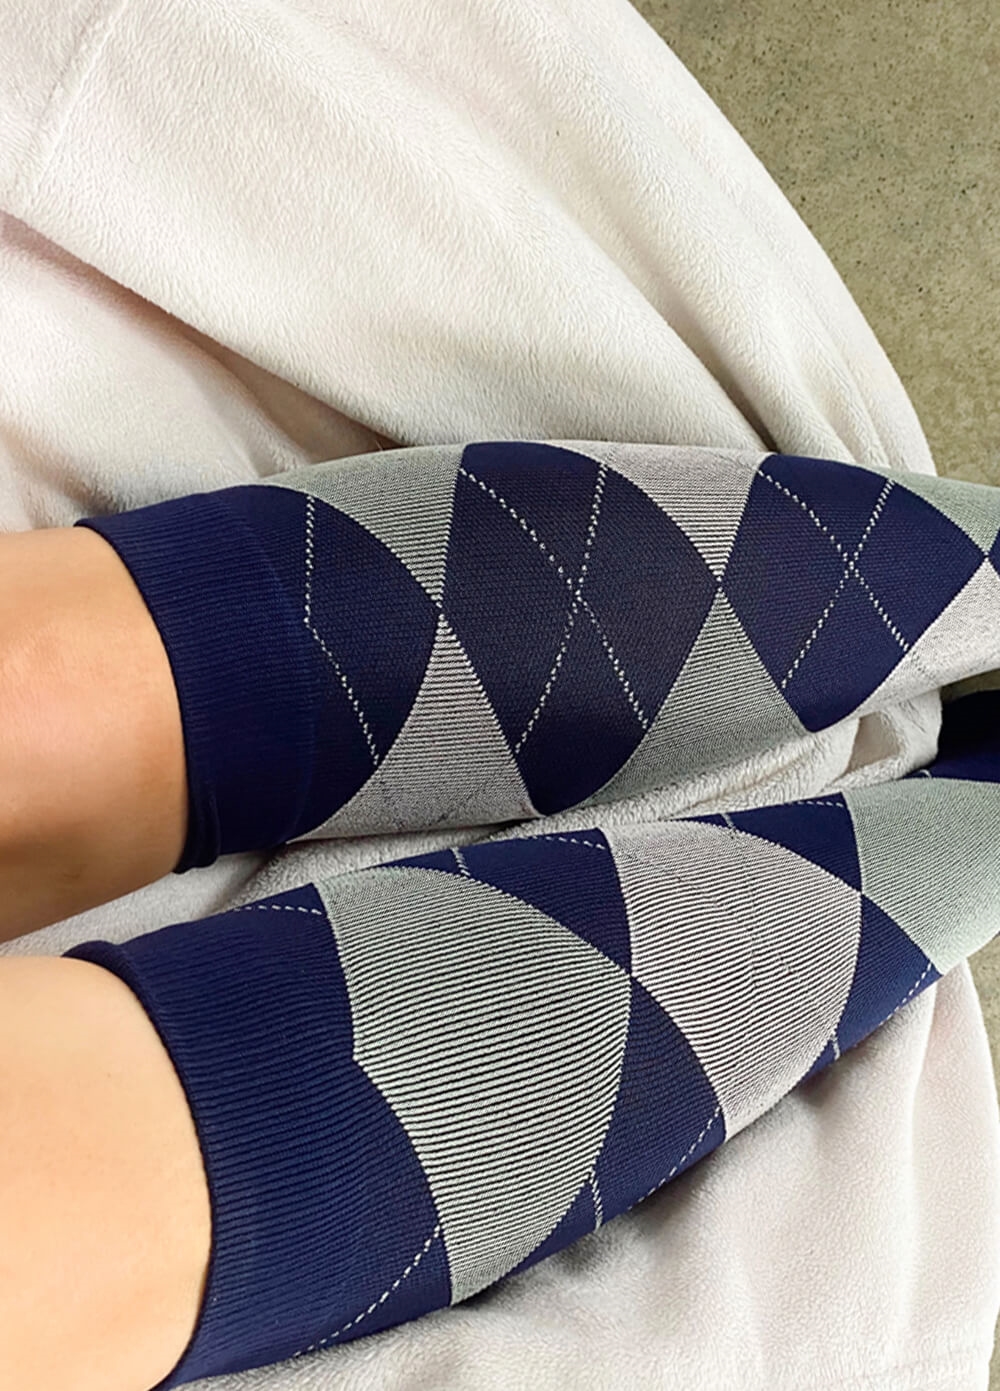 Mama Sox - Excite Maternity Compression Socks in Navy Argyle